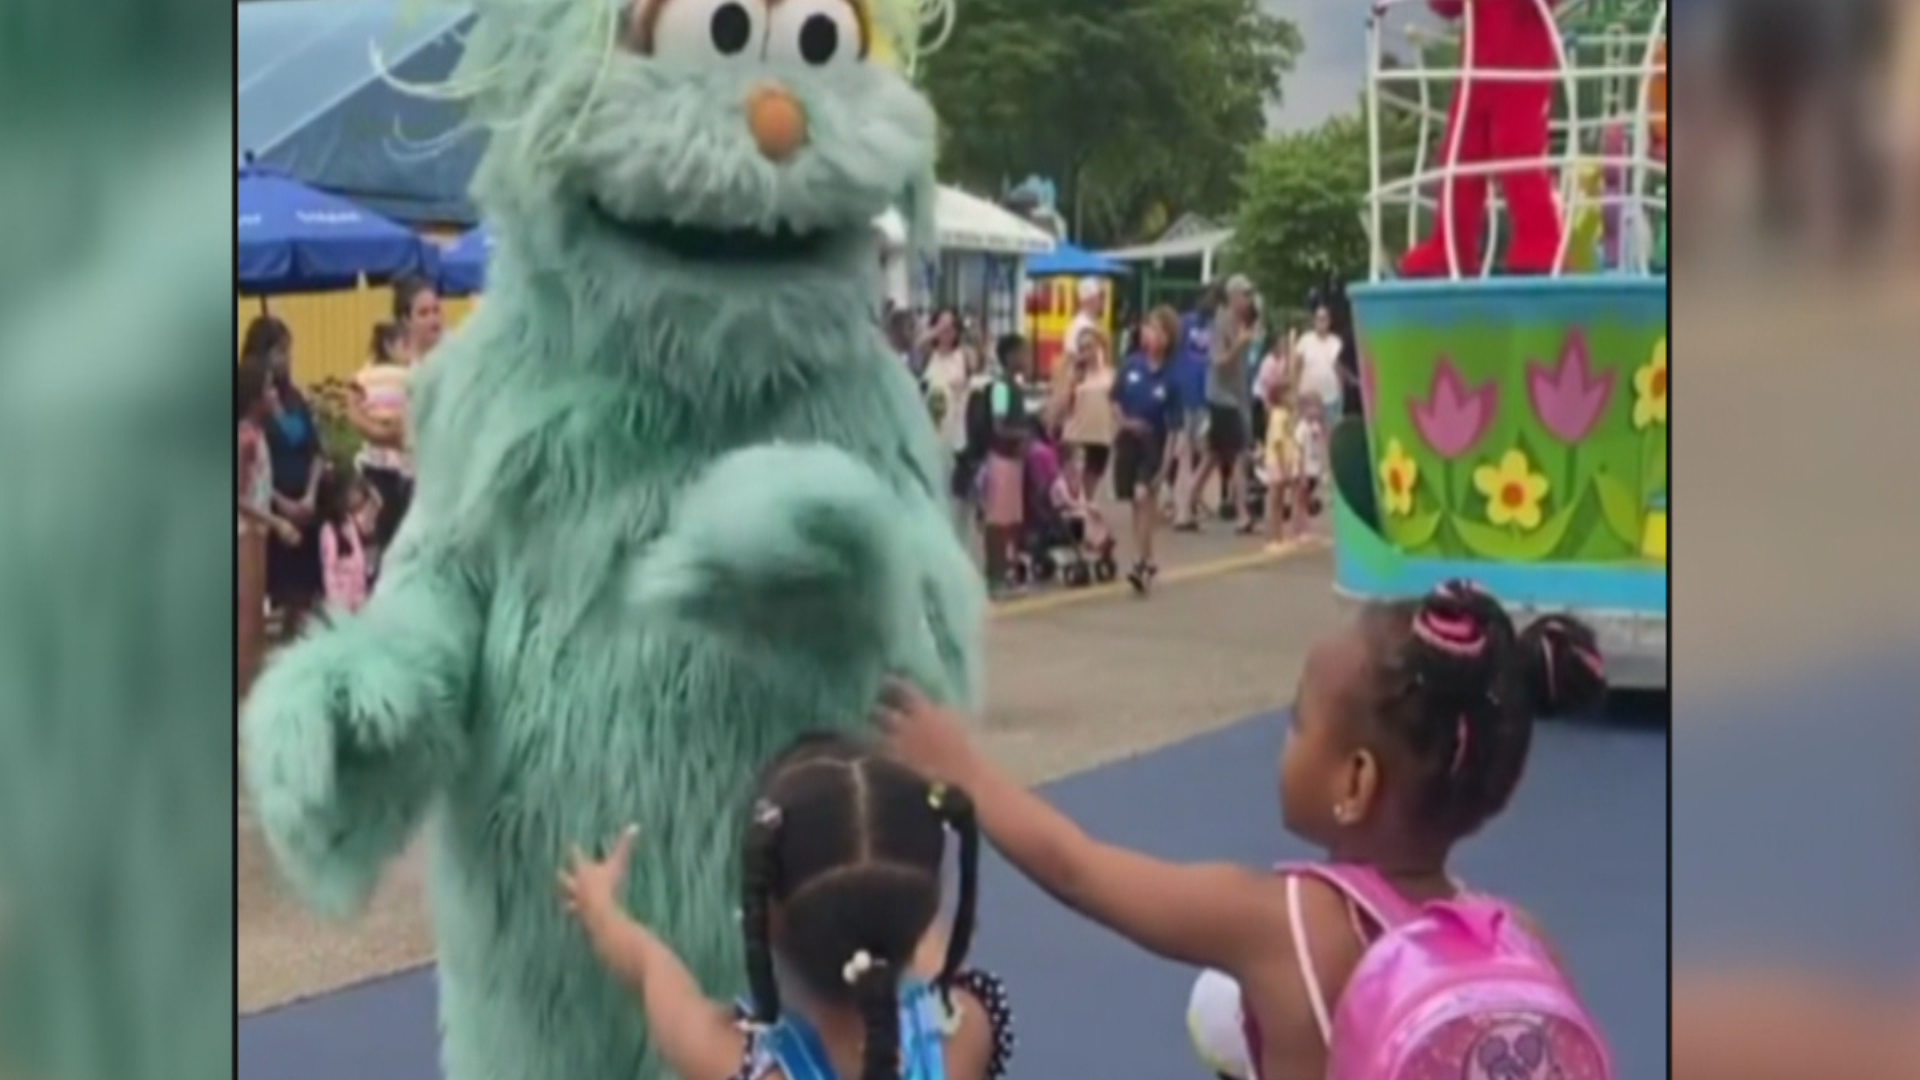 Sesame Place Announces Changes to Diversity, Equity, and Inclusion Programs After Several Incidents Where Employees Ignored Black Children